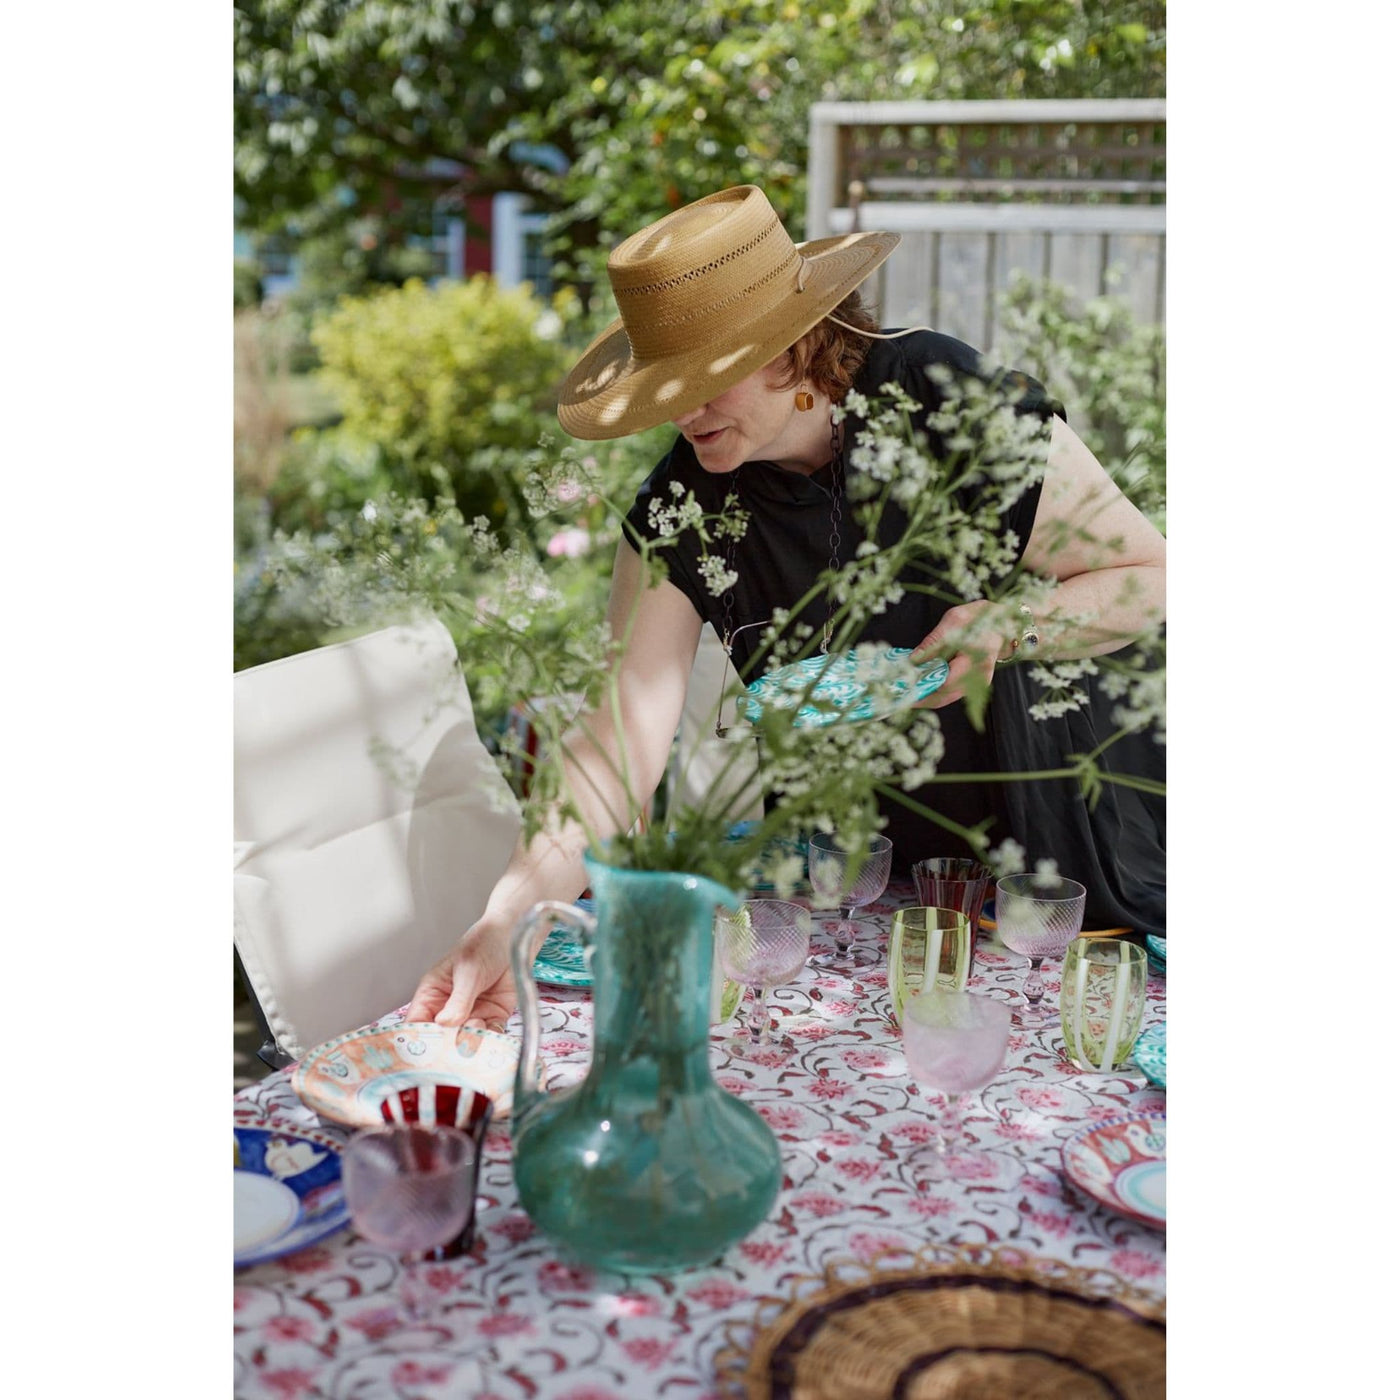 Inside page of Faire Press Magazine Issue 7. Woman arranging dishes on table outdoors. 